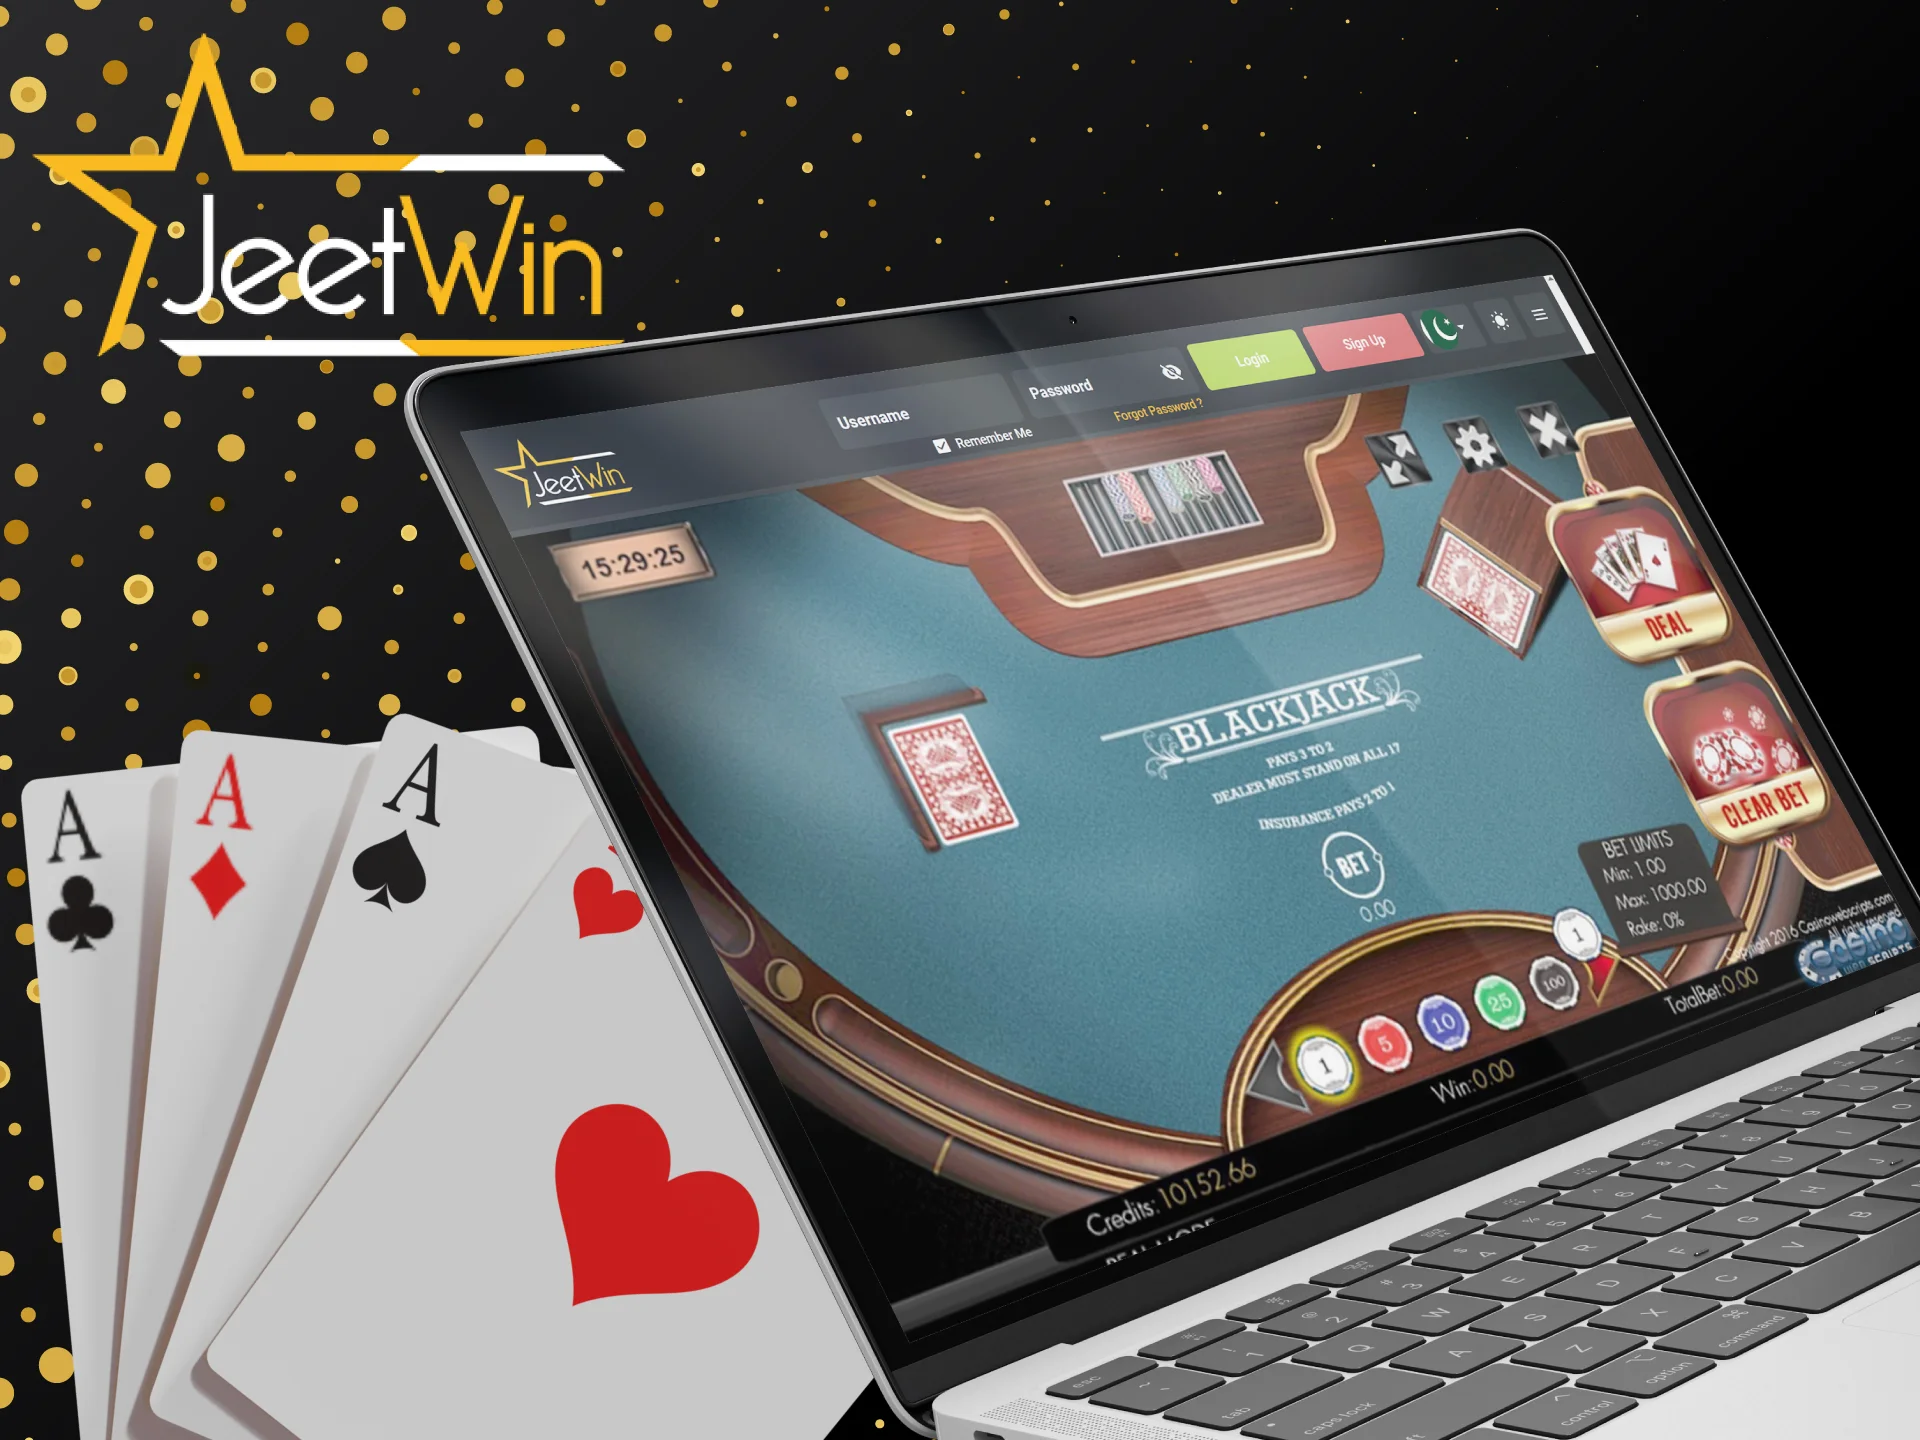 Try playing blackjack in demo mode at JeetWin to understand the rules of the game.